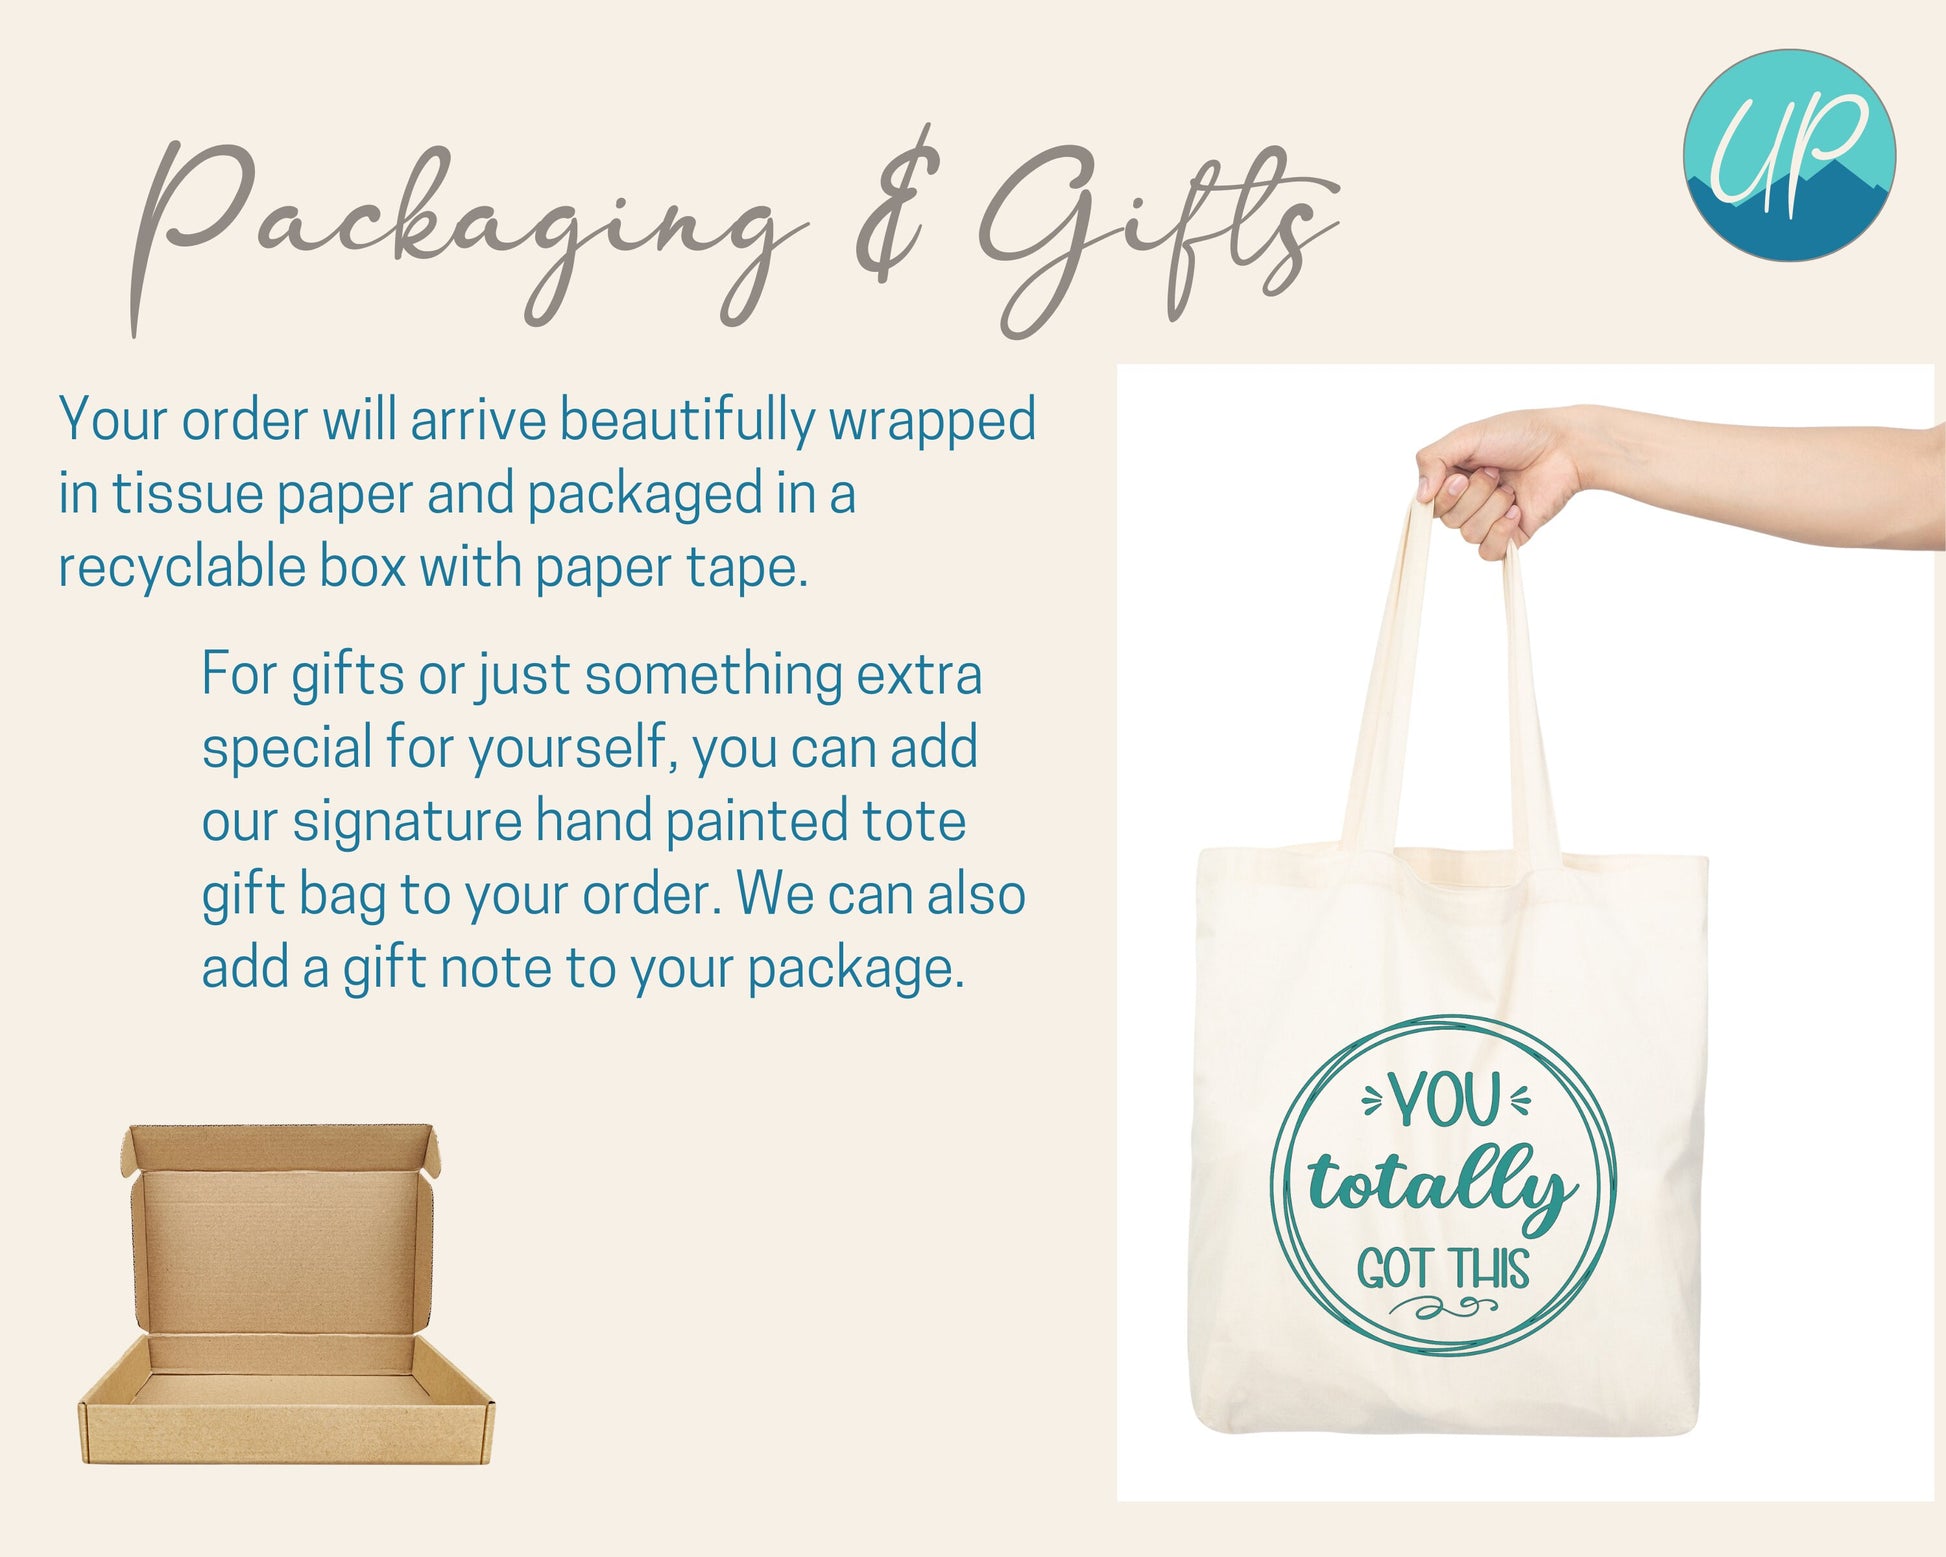 Information page with brand logo showing packaging and gifting options. Hand holding natural colored tote bag with teal design of three large overlapping thin circles with message inside, You totally got this. Wrapped in tissue paper as standard.